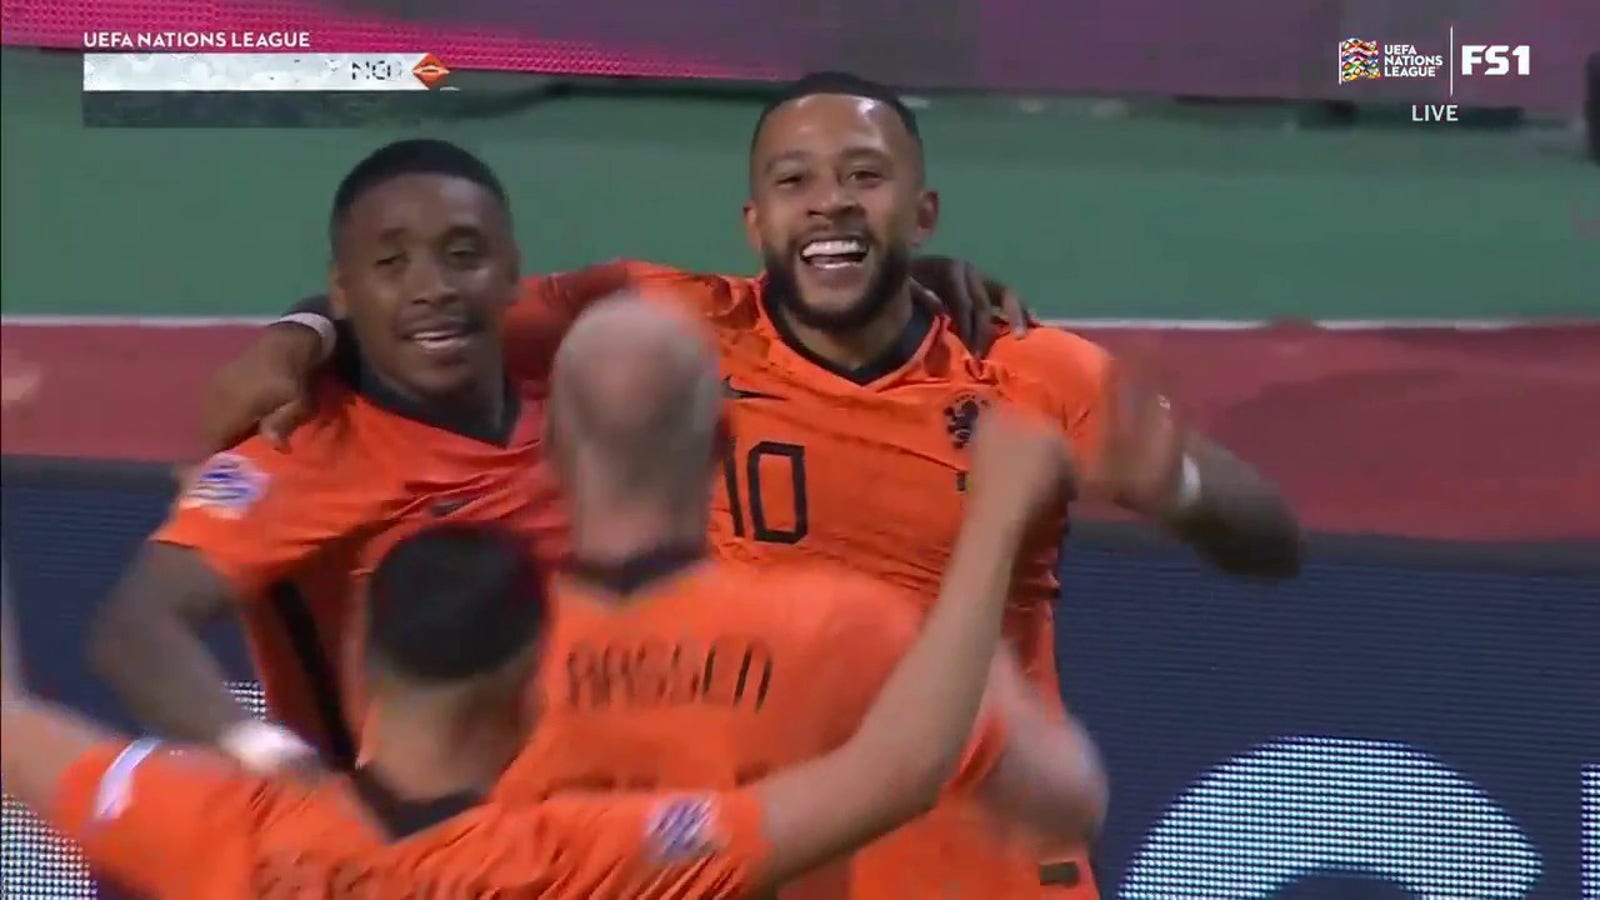 Memphis Depay's clinical finish helps the Netherlands grab a 2-0 lead